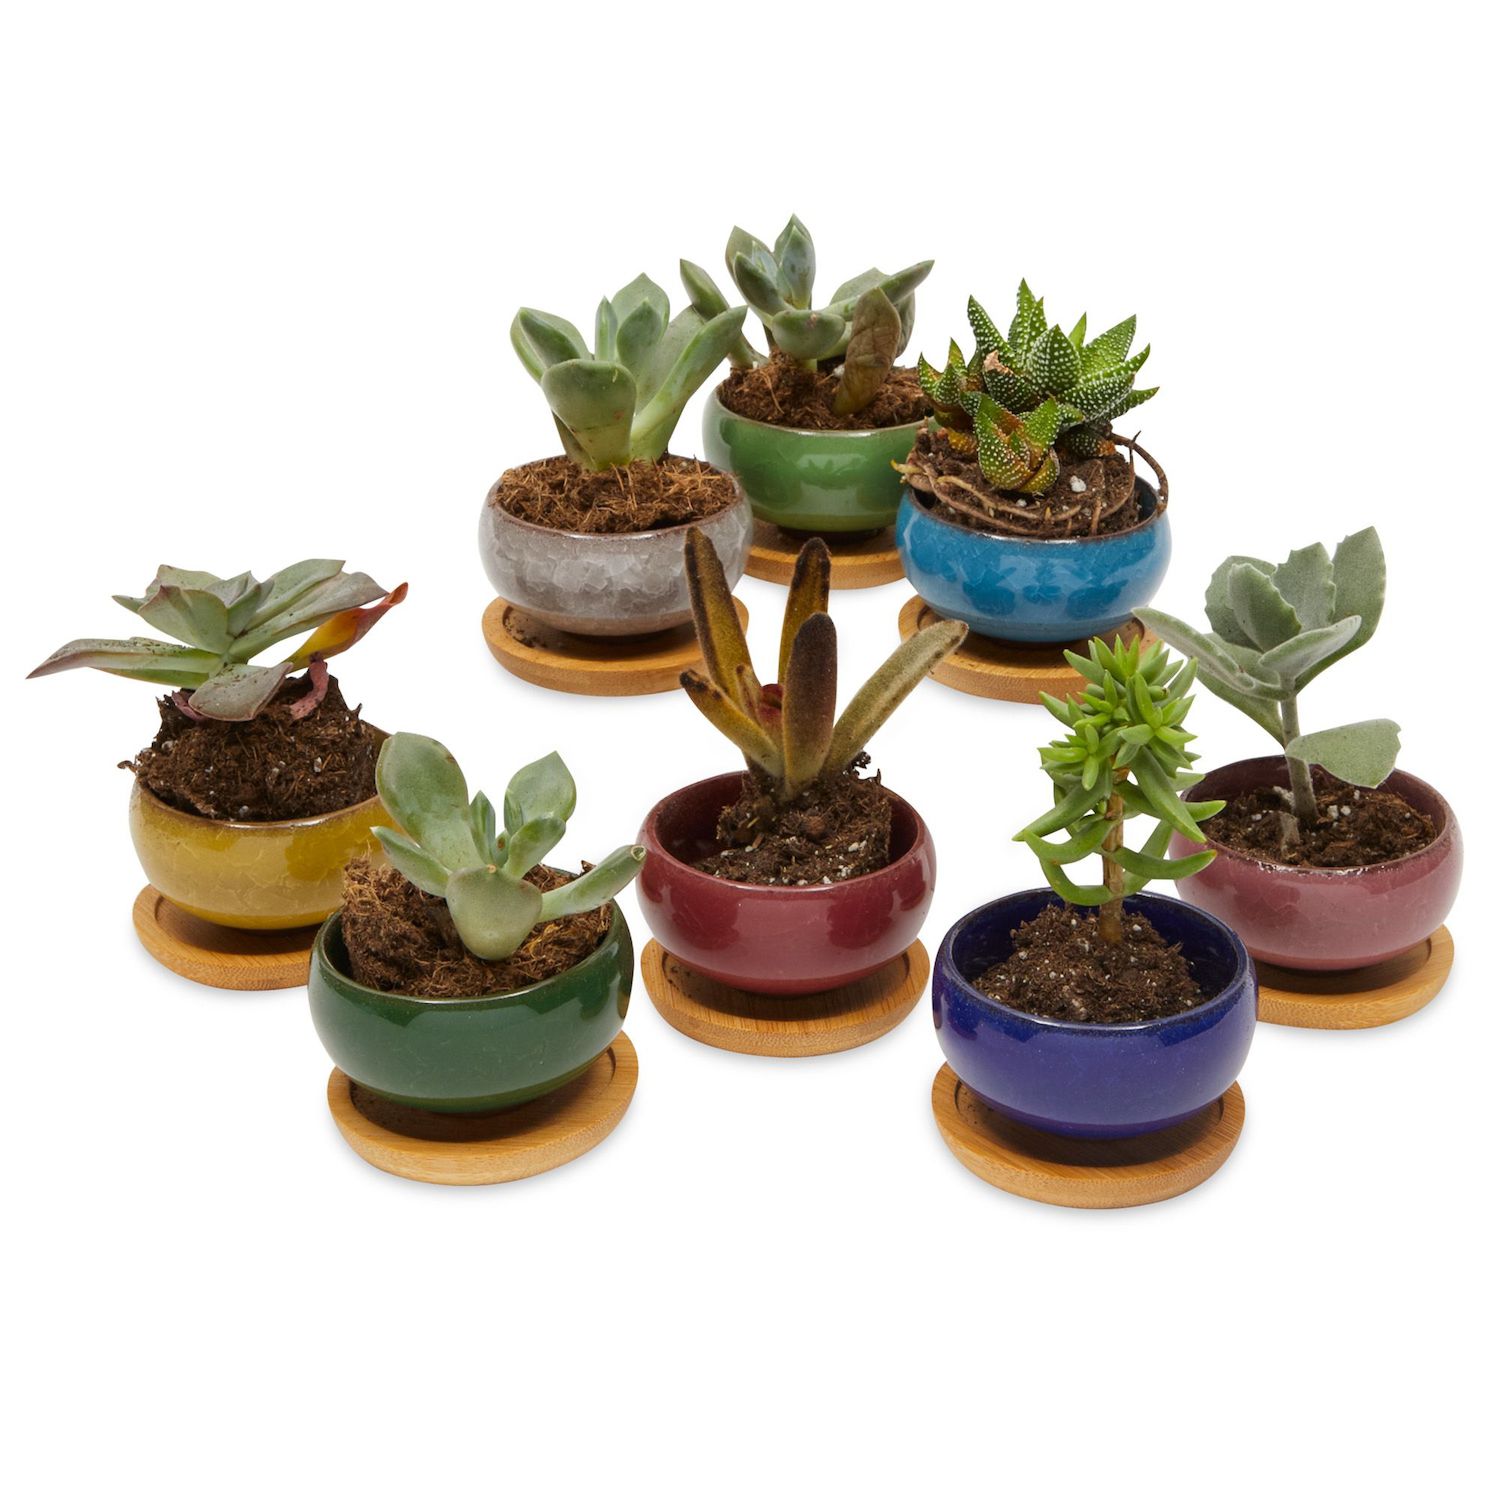 Juvale 10-Pack 2-Inch Mini Terracotta Pots with Drainage Holes for  Succulents, Plants, Herbs, and Flowers, Small Clay Pot Planters